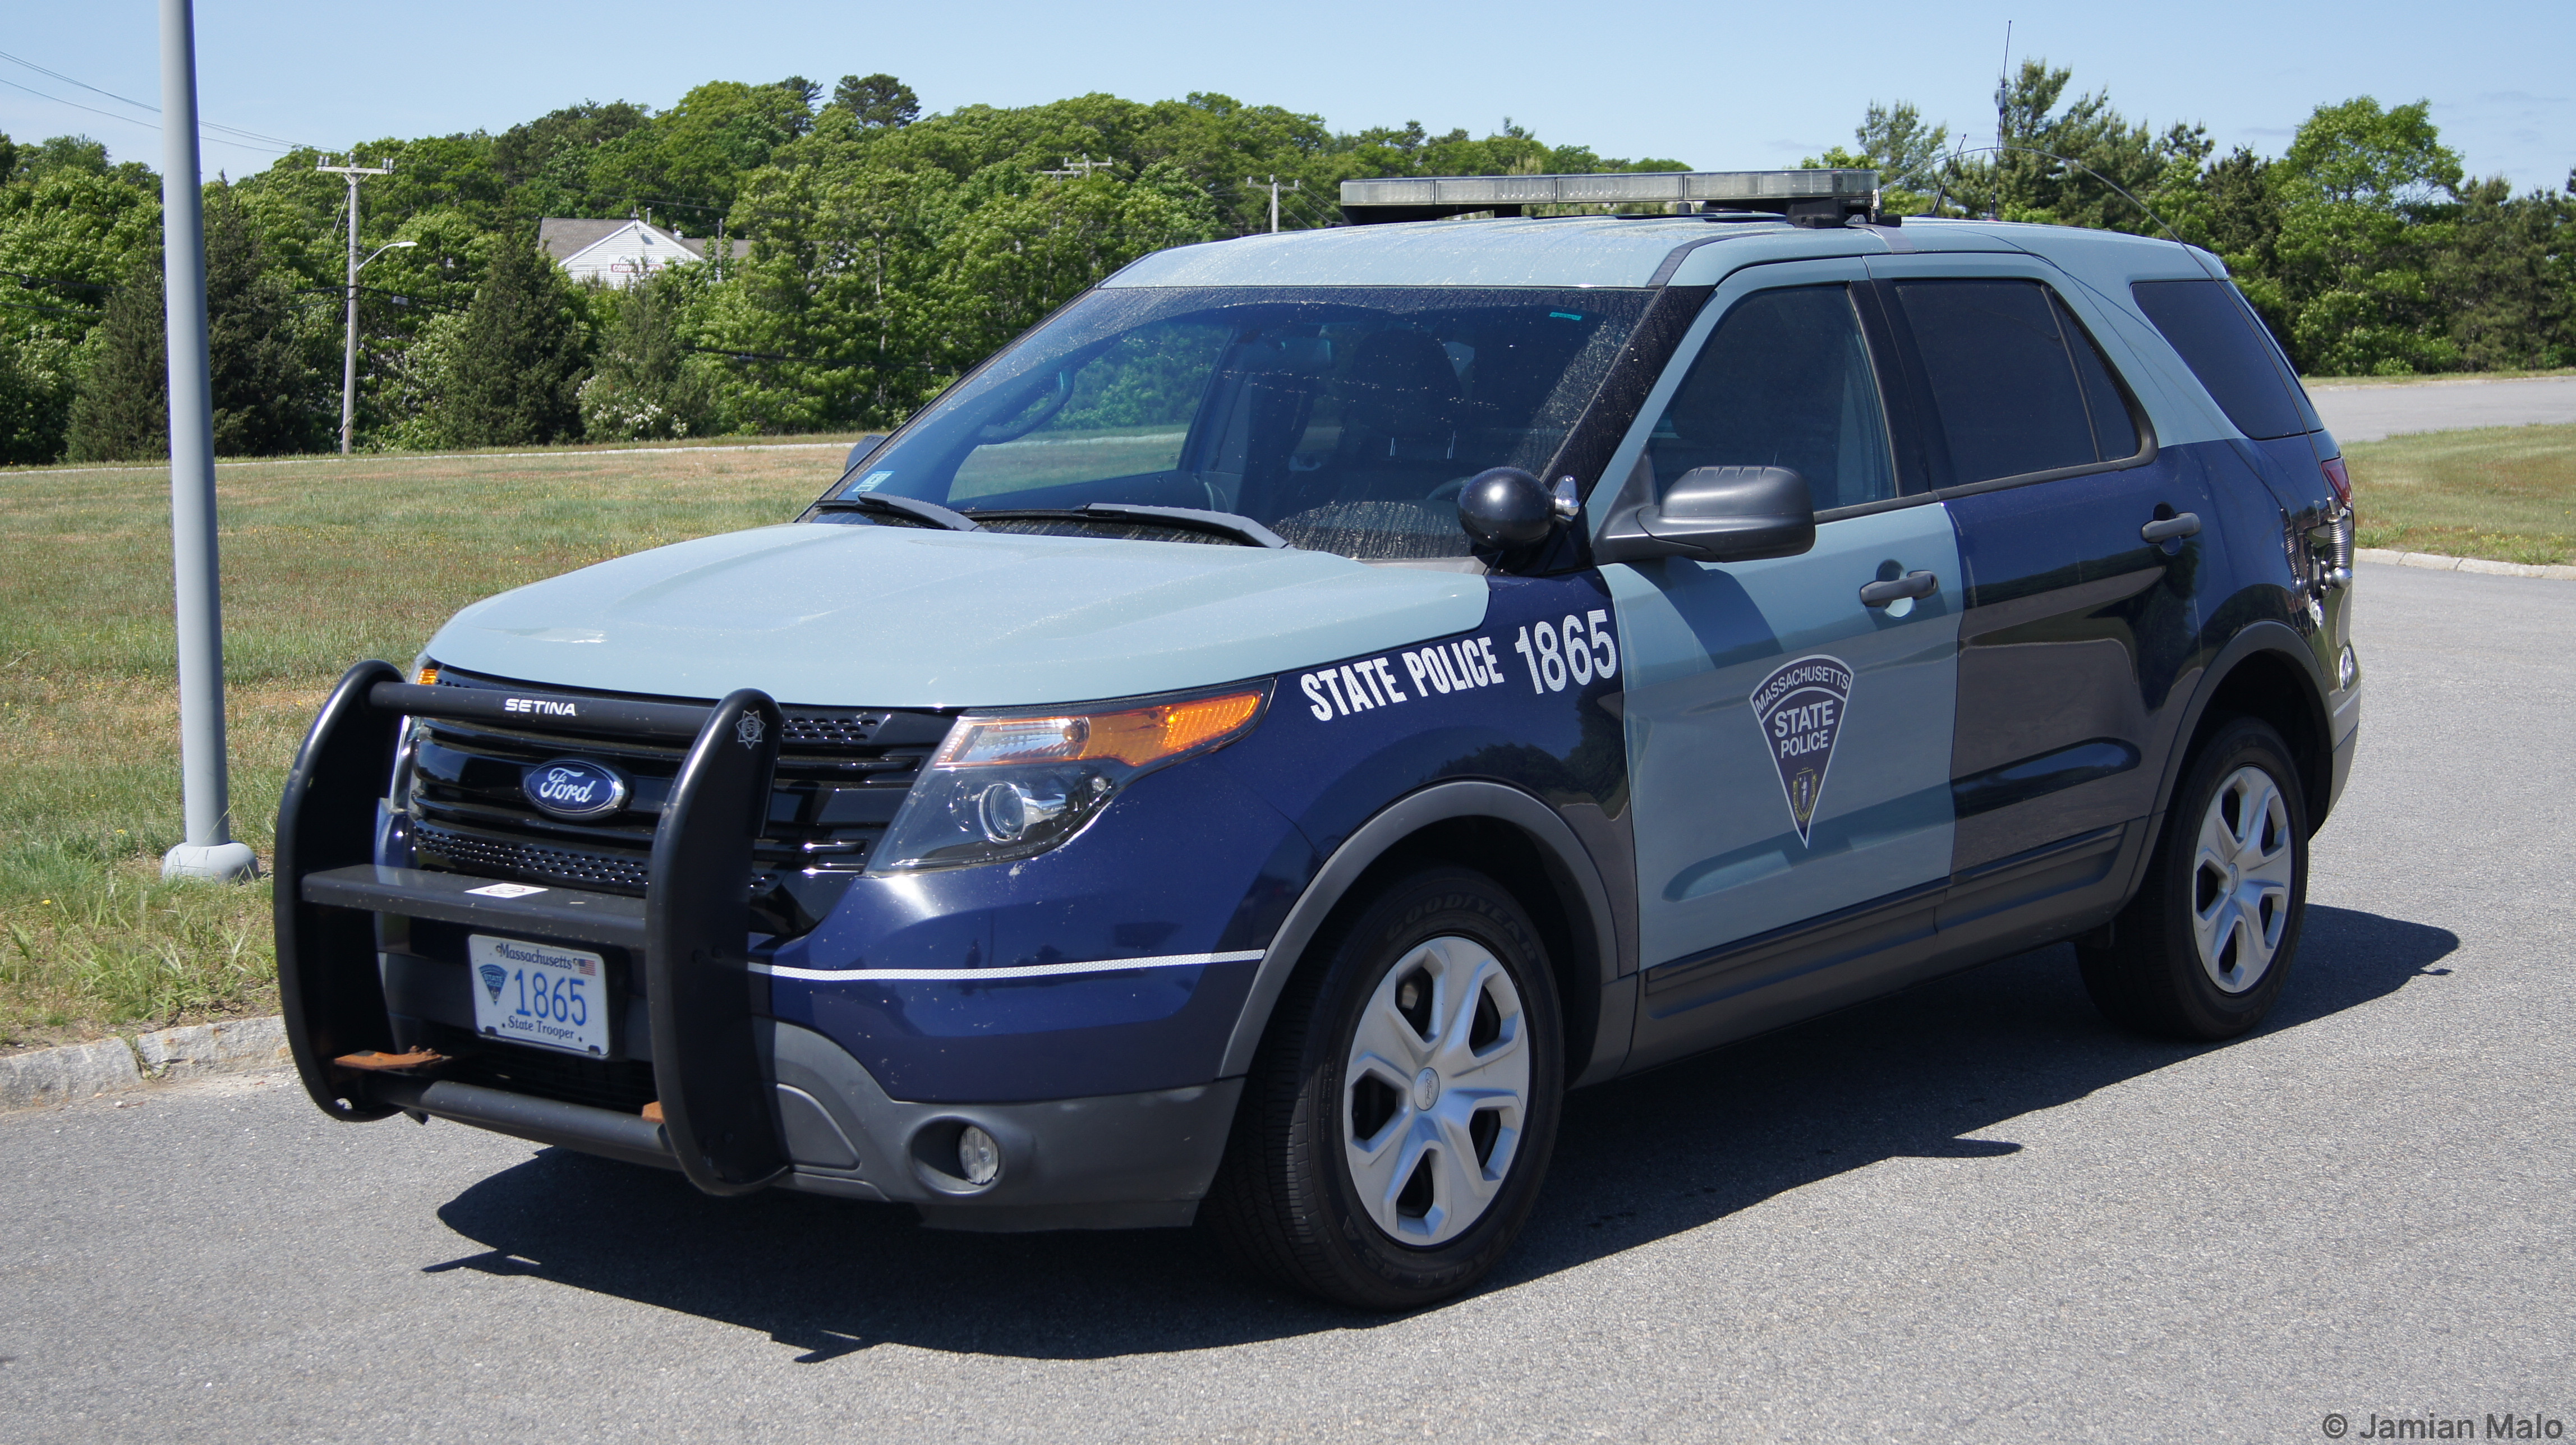 A photo  of Massachusetts State Police
            Cruiser 1865, a 2013-2014 Ford Police Interceptor Utility             taken by Jamian Malo